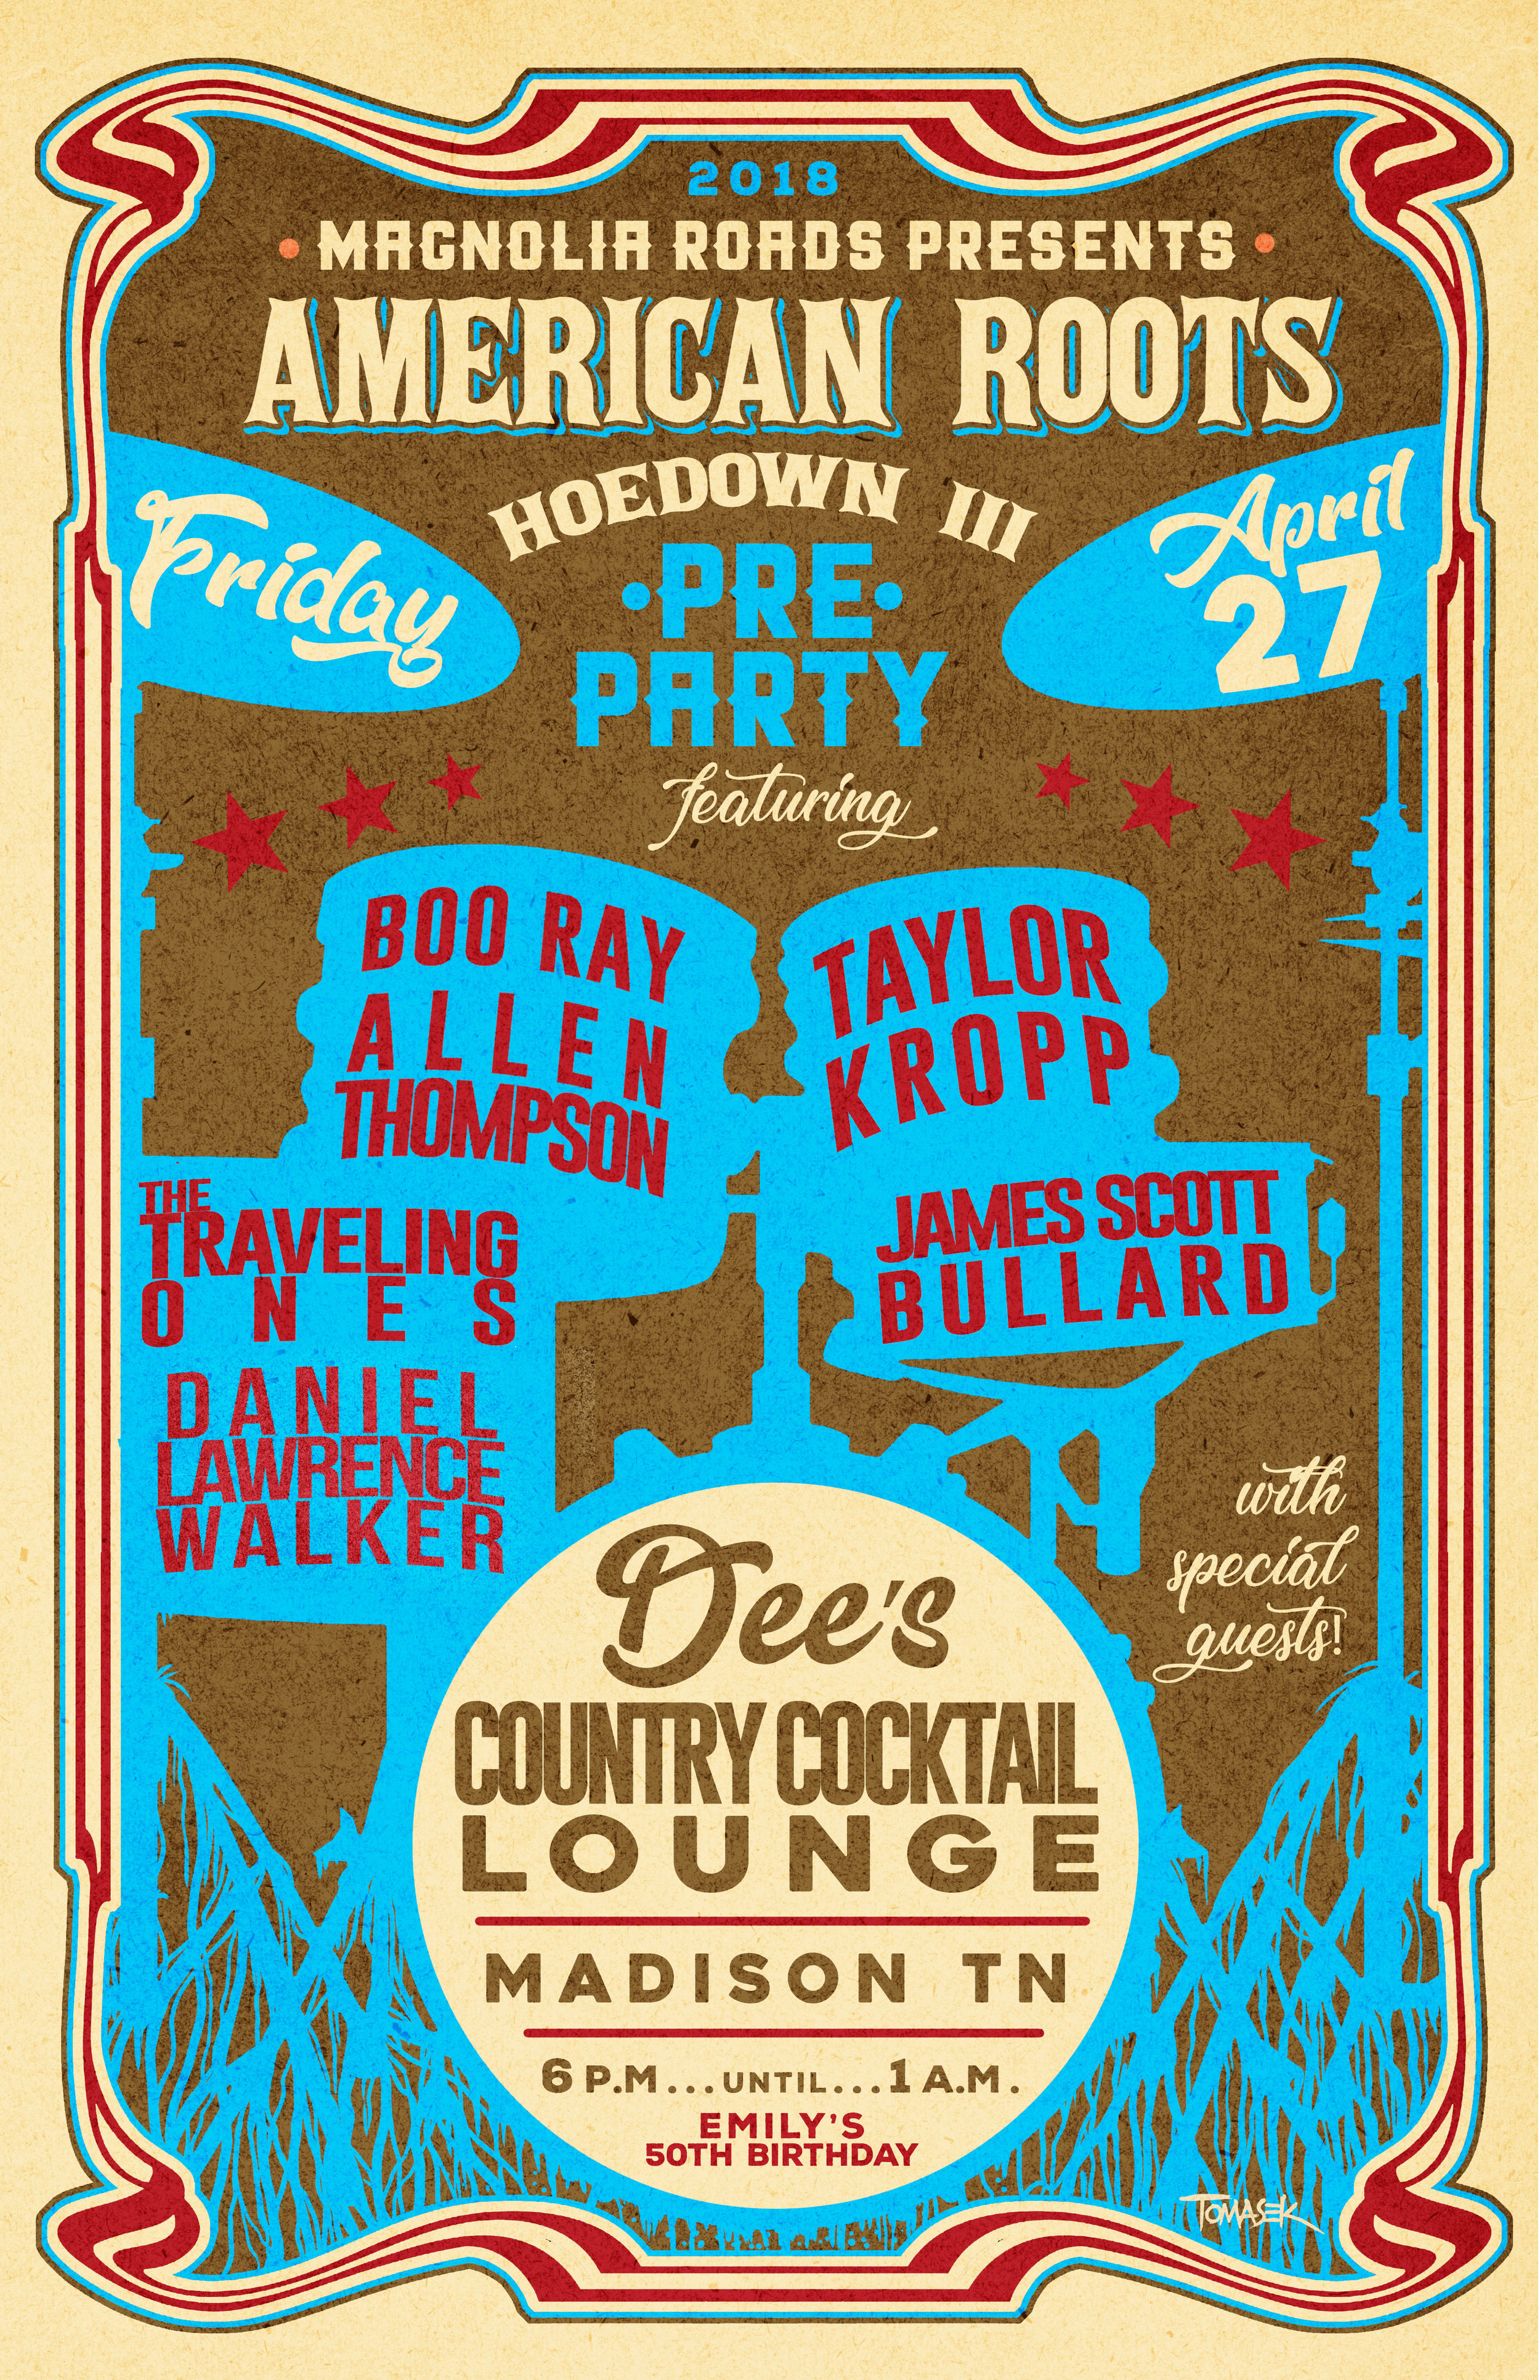 MagRds American Roots Hoedown Pre Party 18v2.jpg